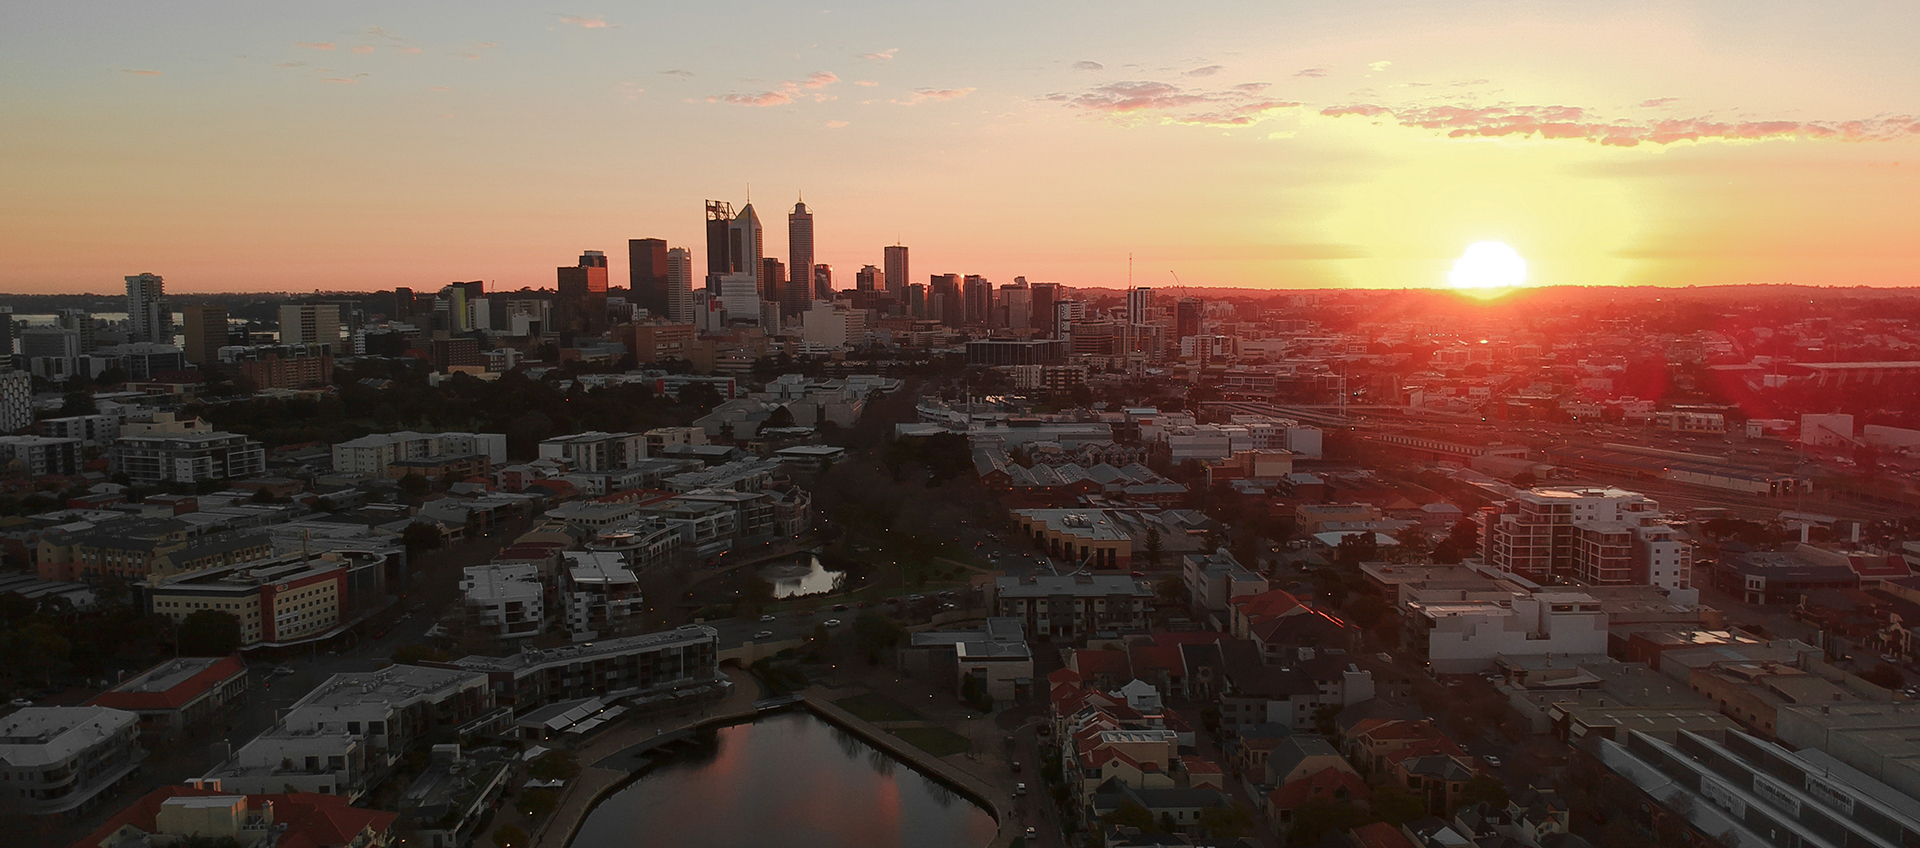 Image showing Perth city skyline